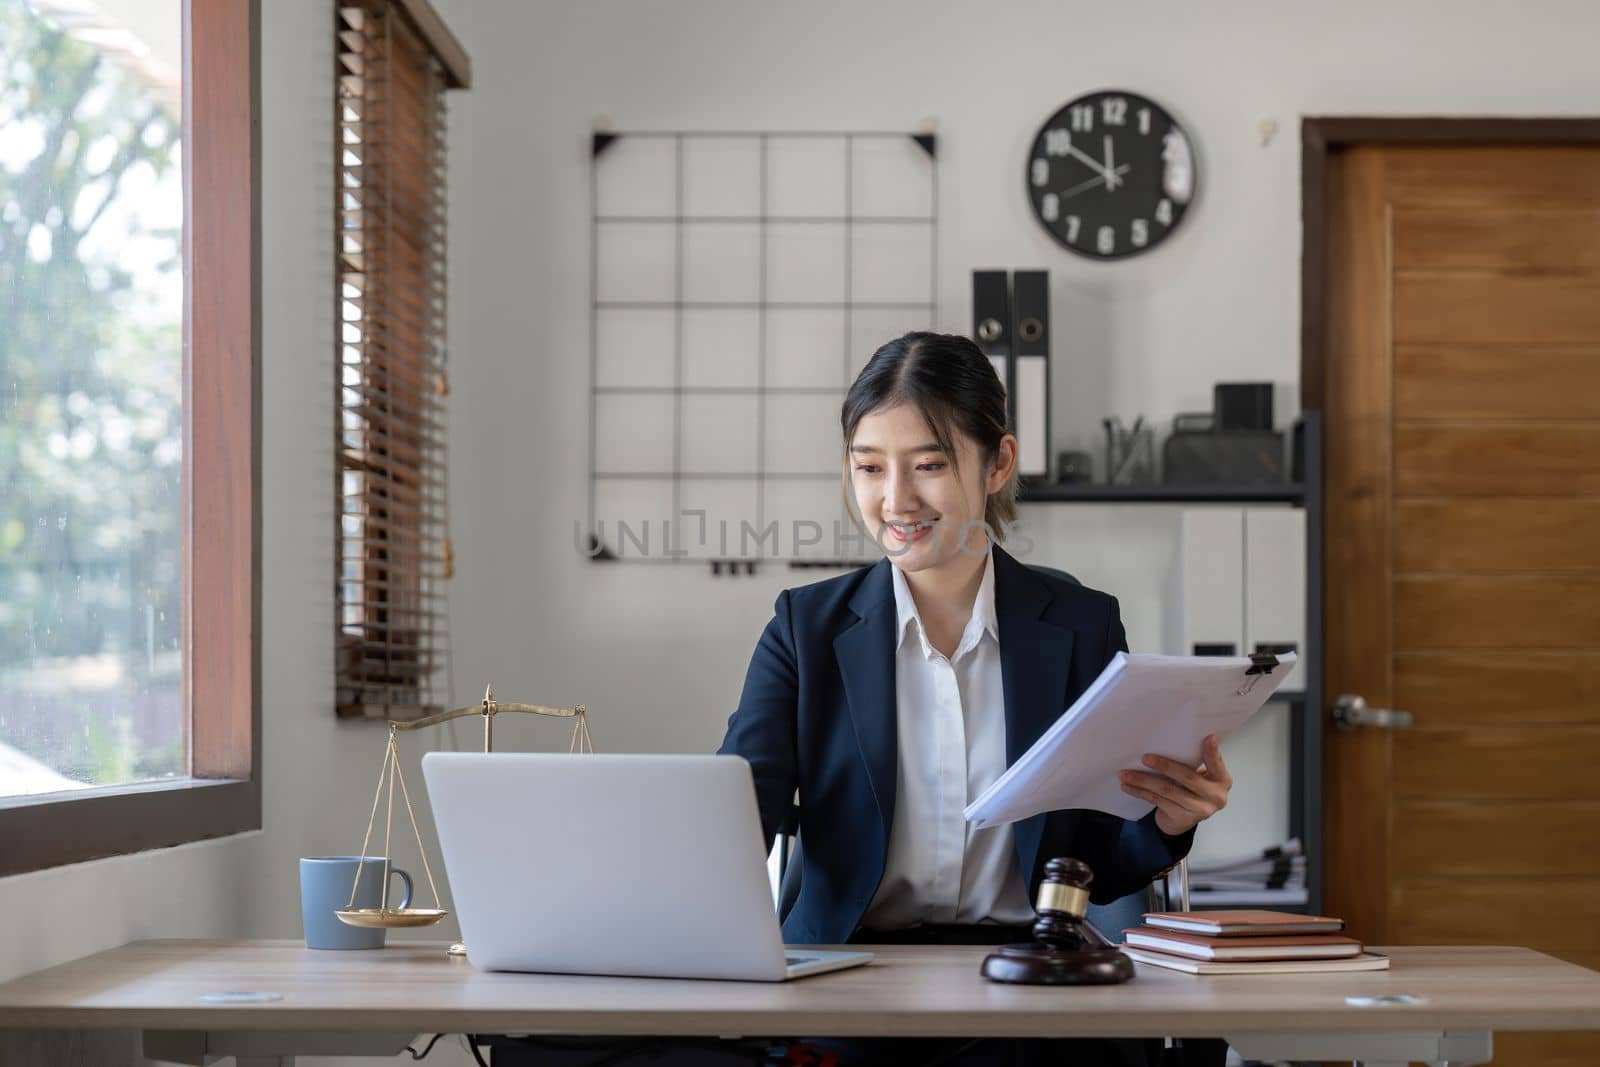 Attractive young lawyer in office Business woman and lawyers discussing contract papers with brass scale on wooden desk in office. Law, legal services, advice, Justice and real estate concept.